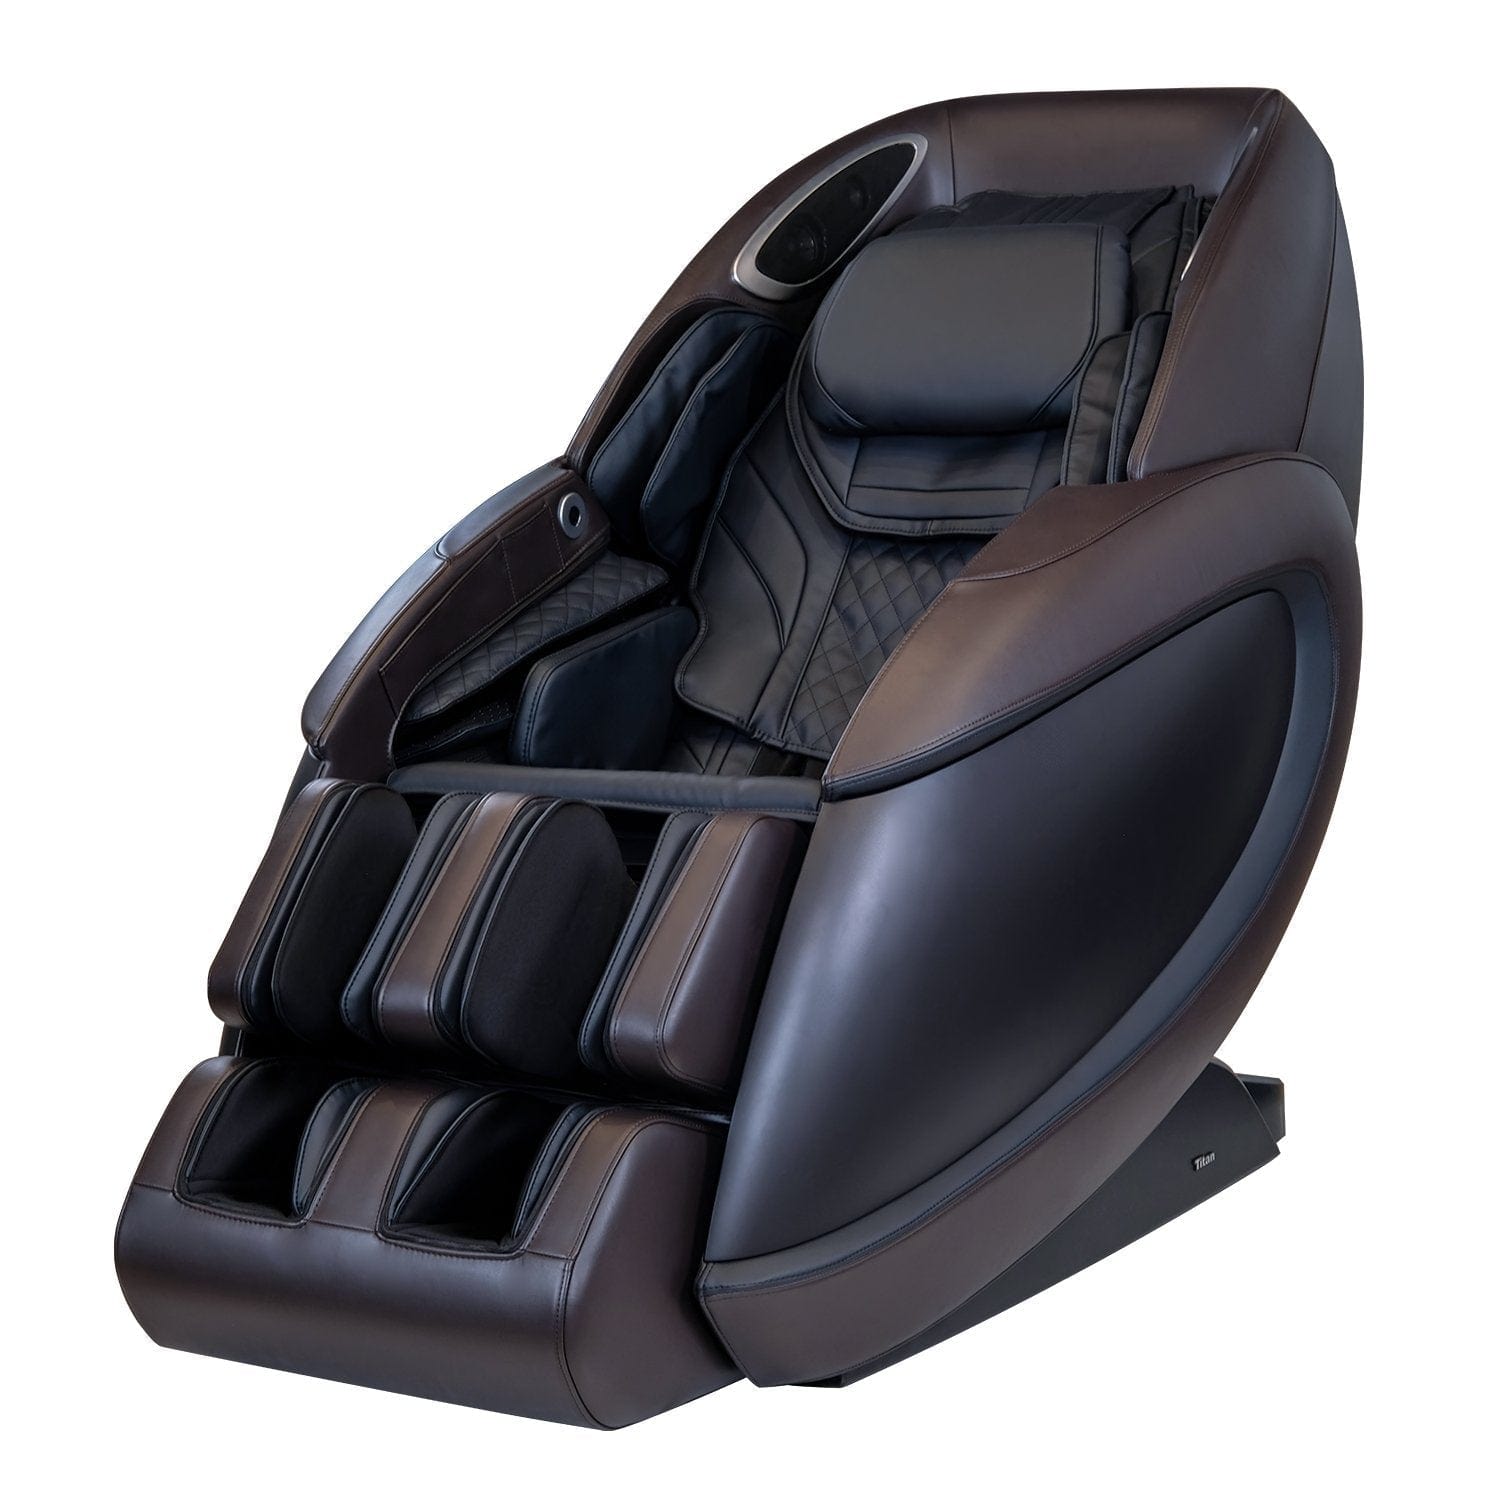 Titan 4D Fleetwood LE | Titan Massage Chairs Brown / Curbside Delivery - Free / 5 Year (3 Years Full Service & Additional 2 Years Parts) titan-chair